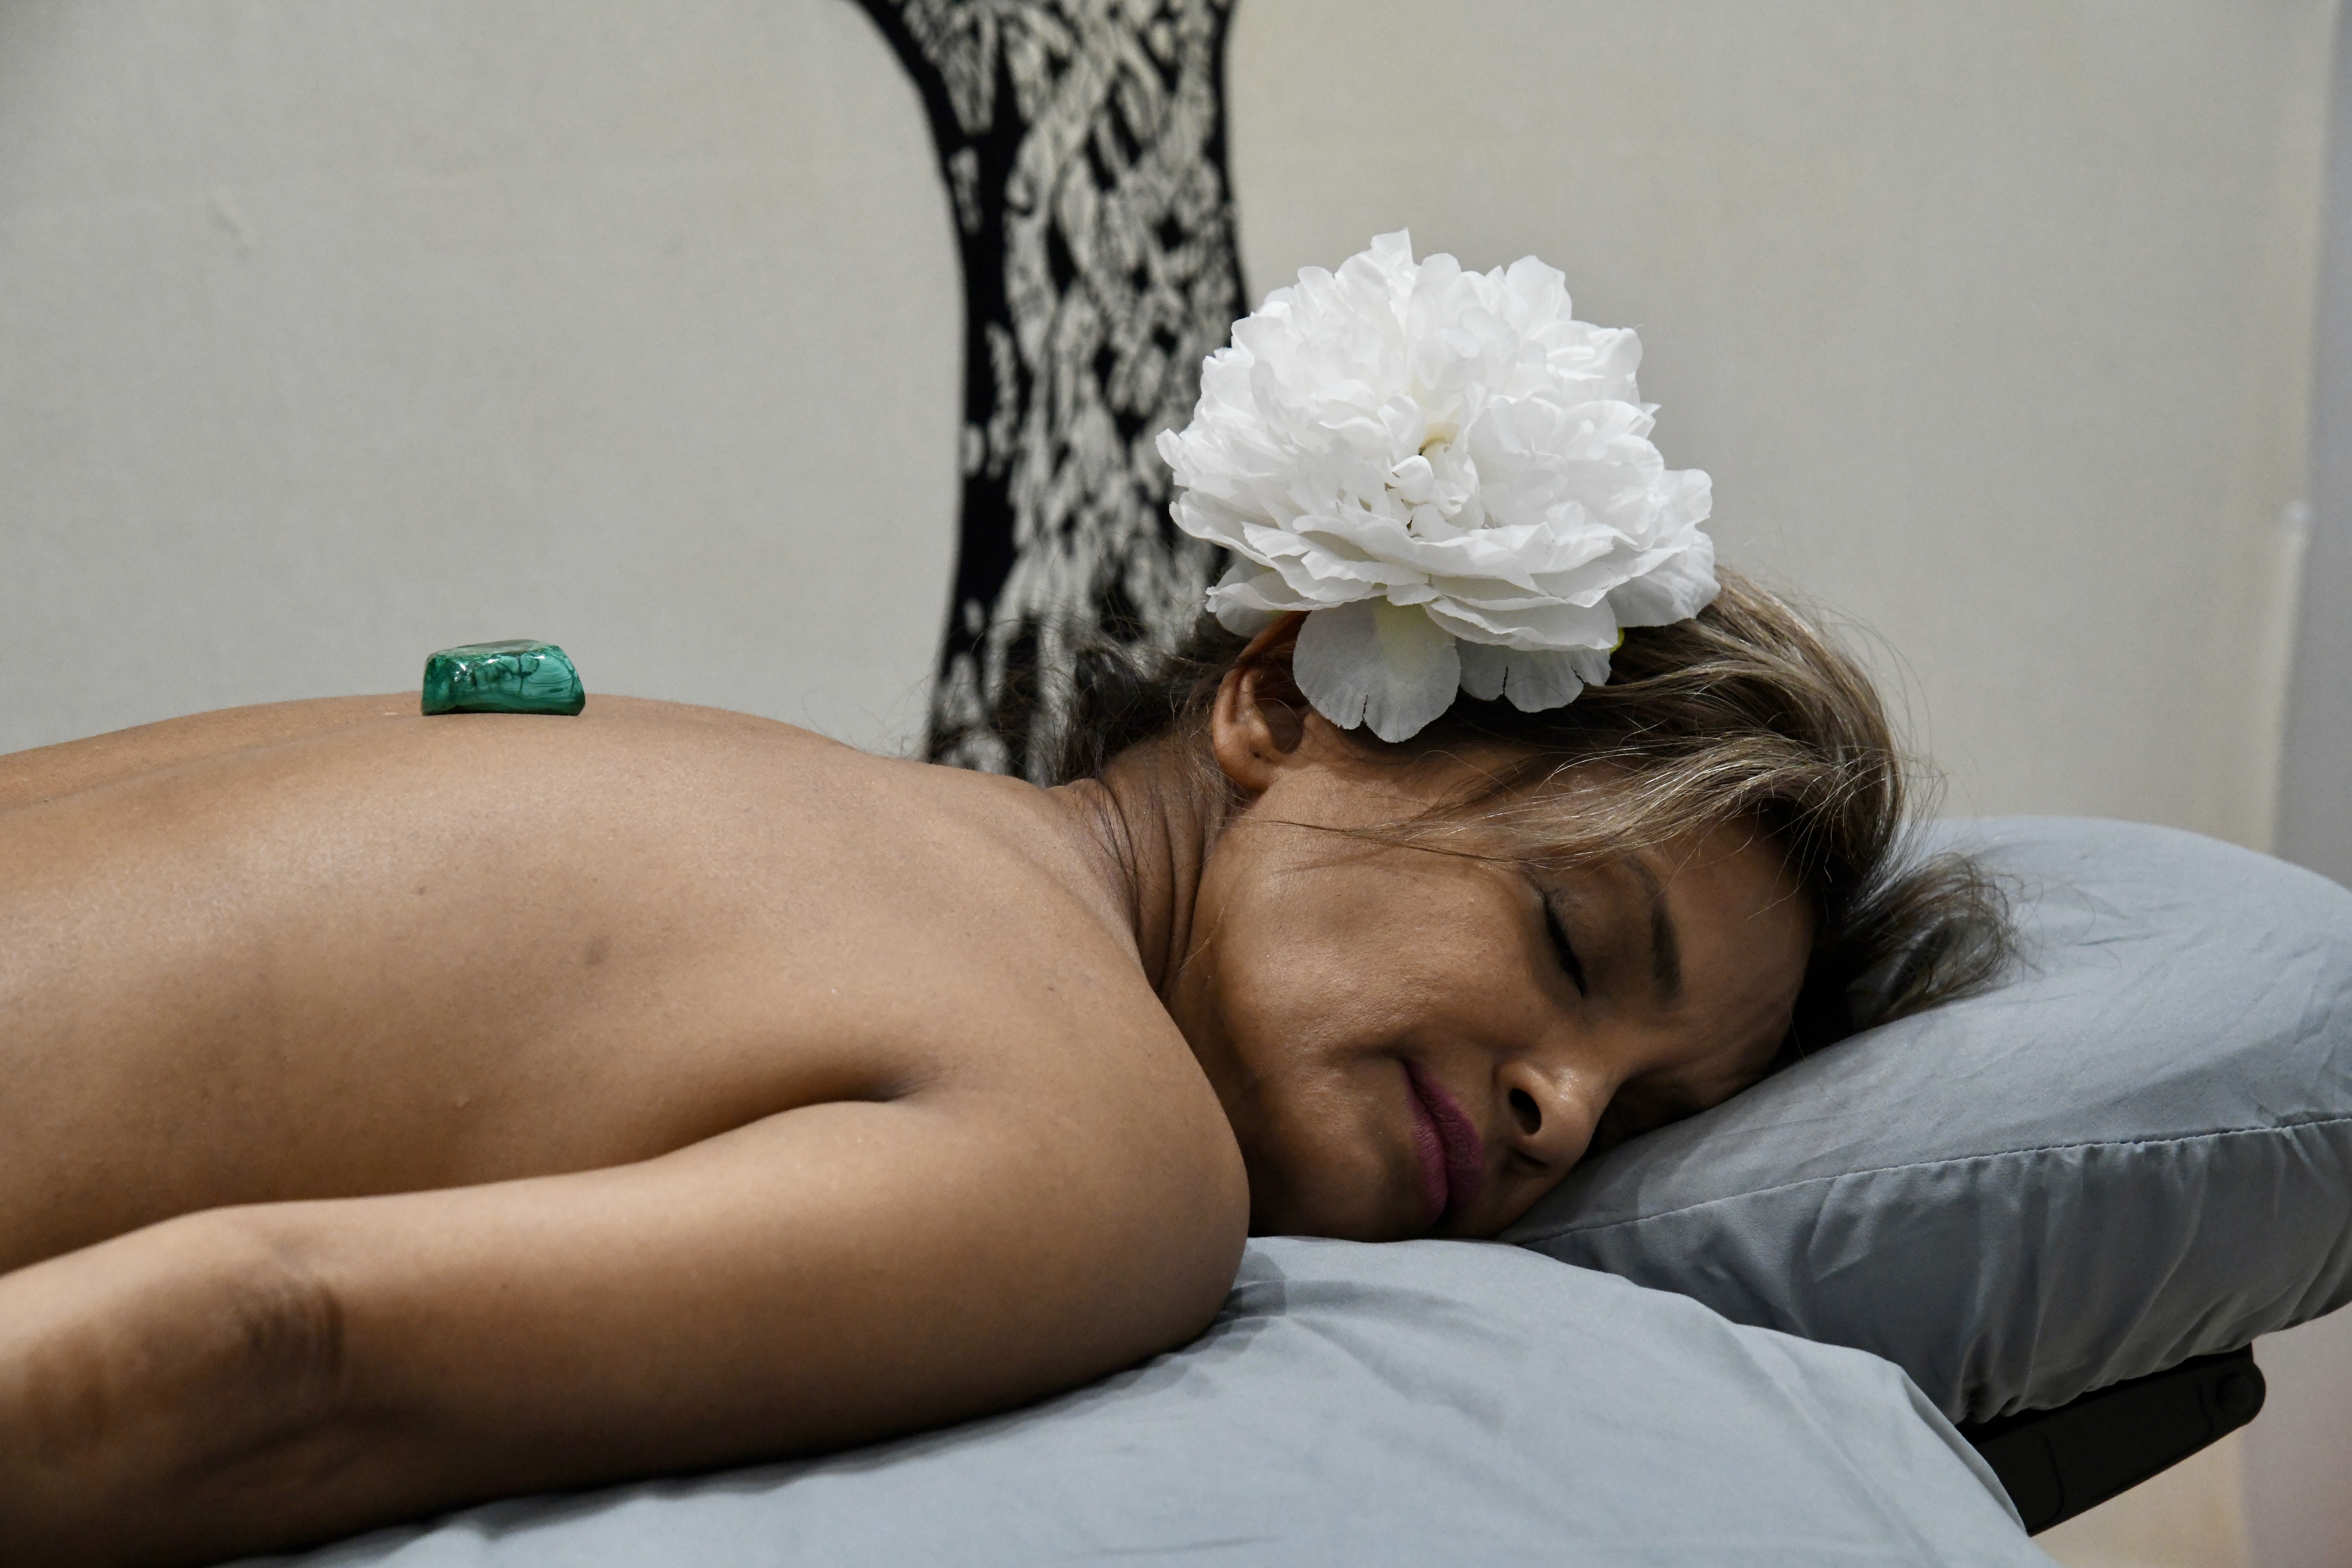 Woman lying down with white flower in her hair and malachite stone on her back